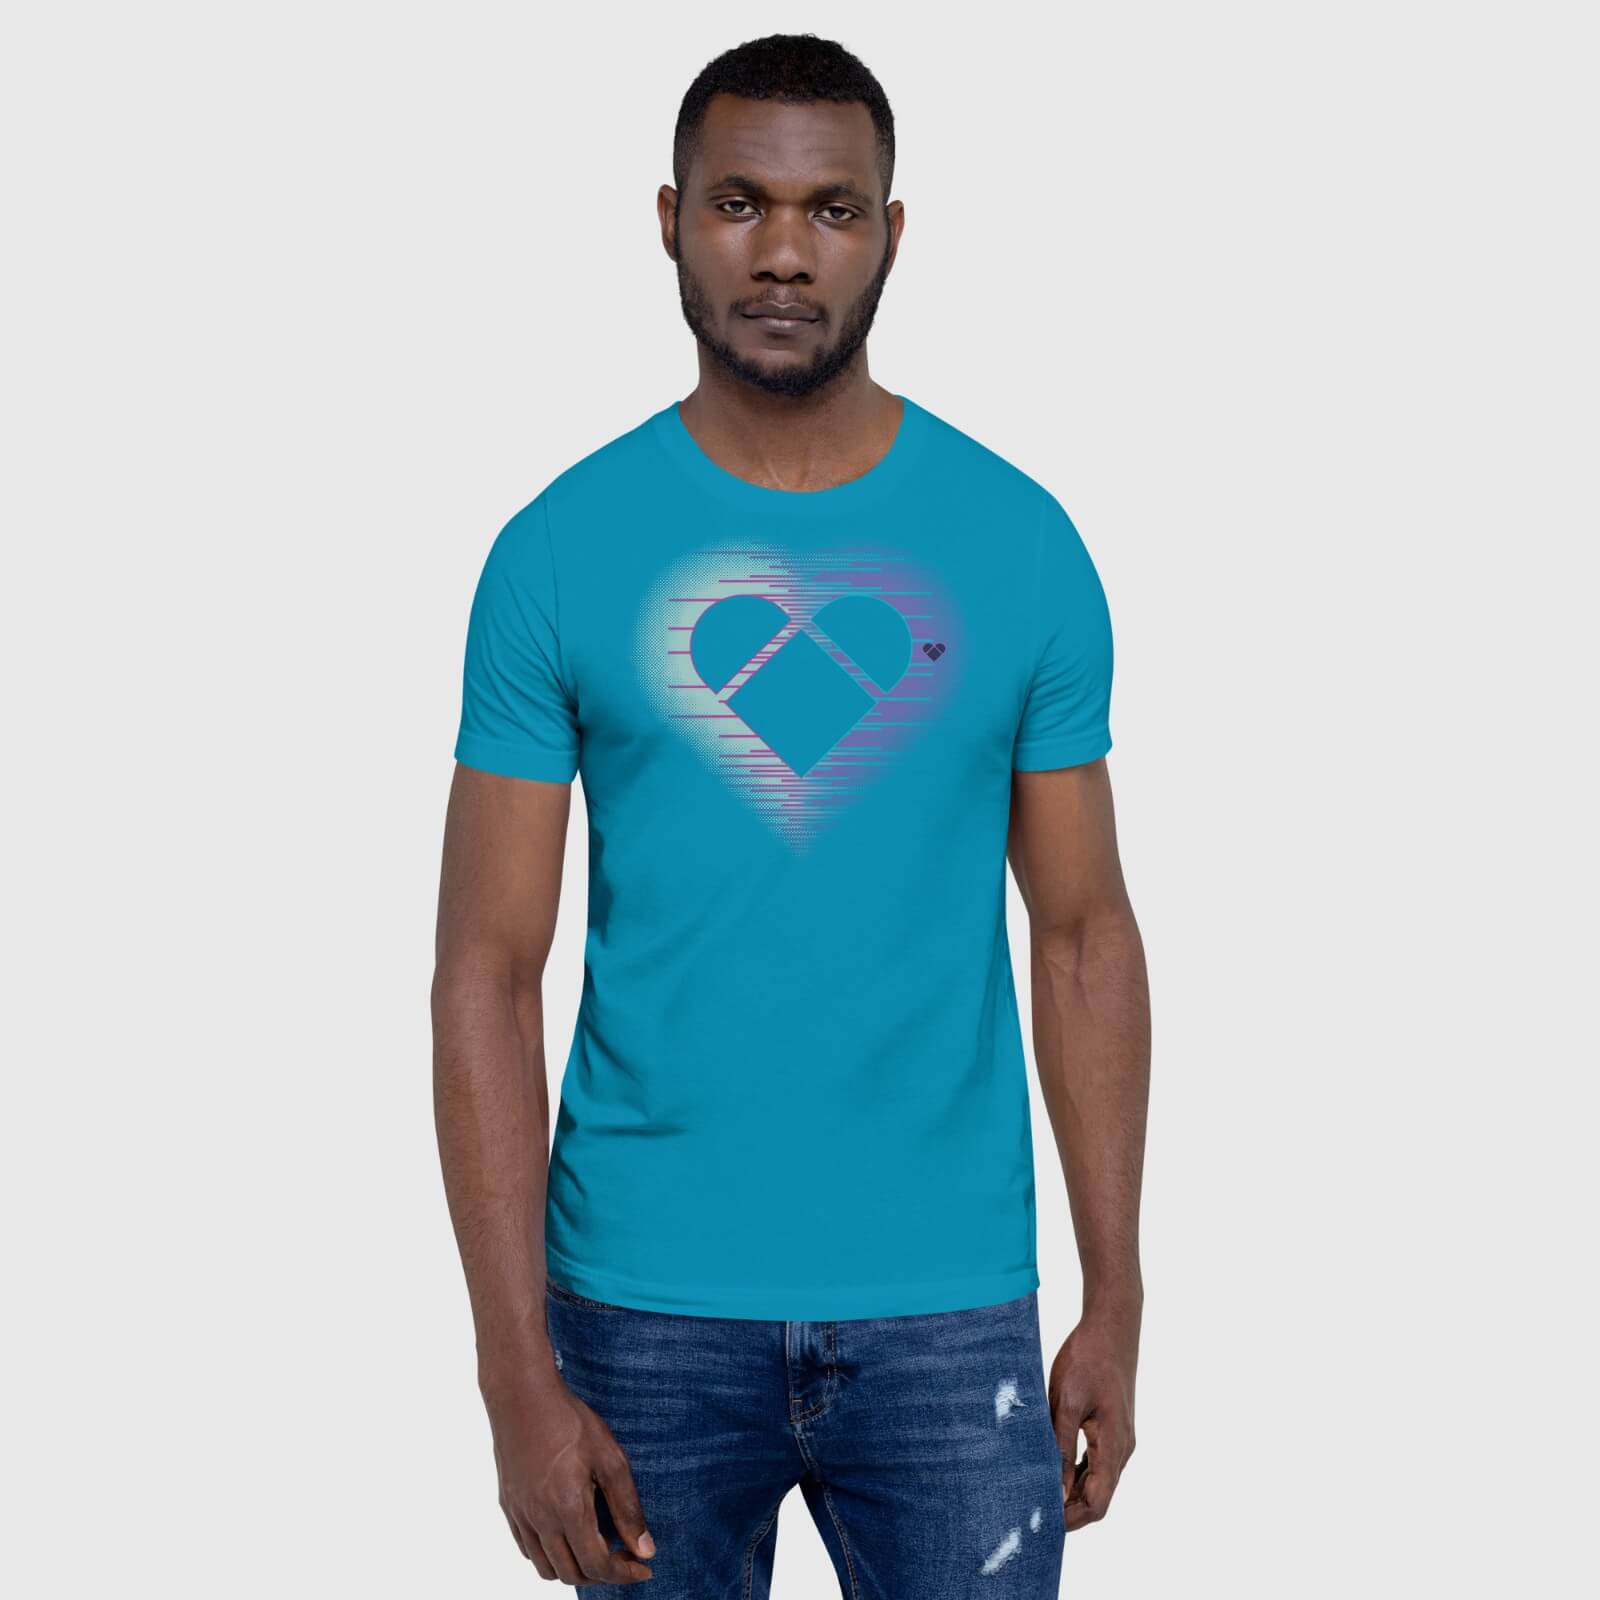 Genderless heart logo tee with vibrant mint and periwinkle aura from Amor Dual by CRiZ AMOR